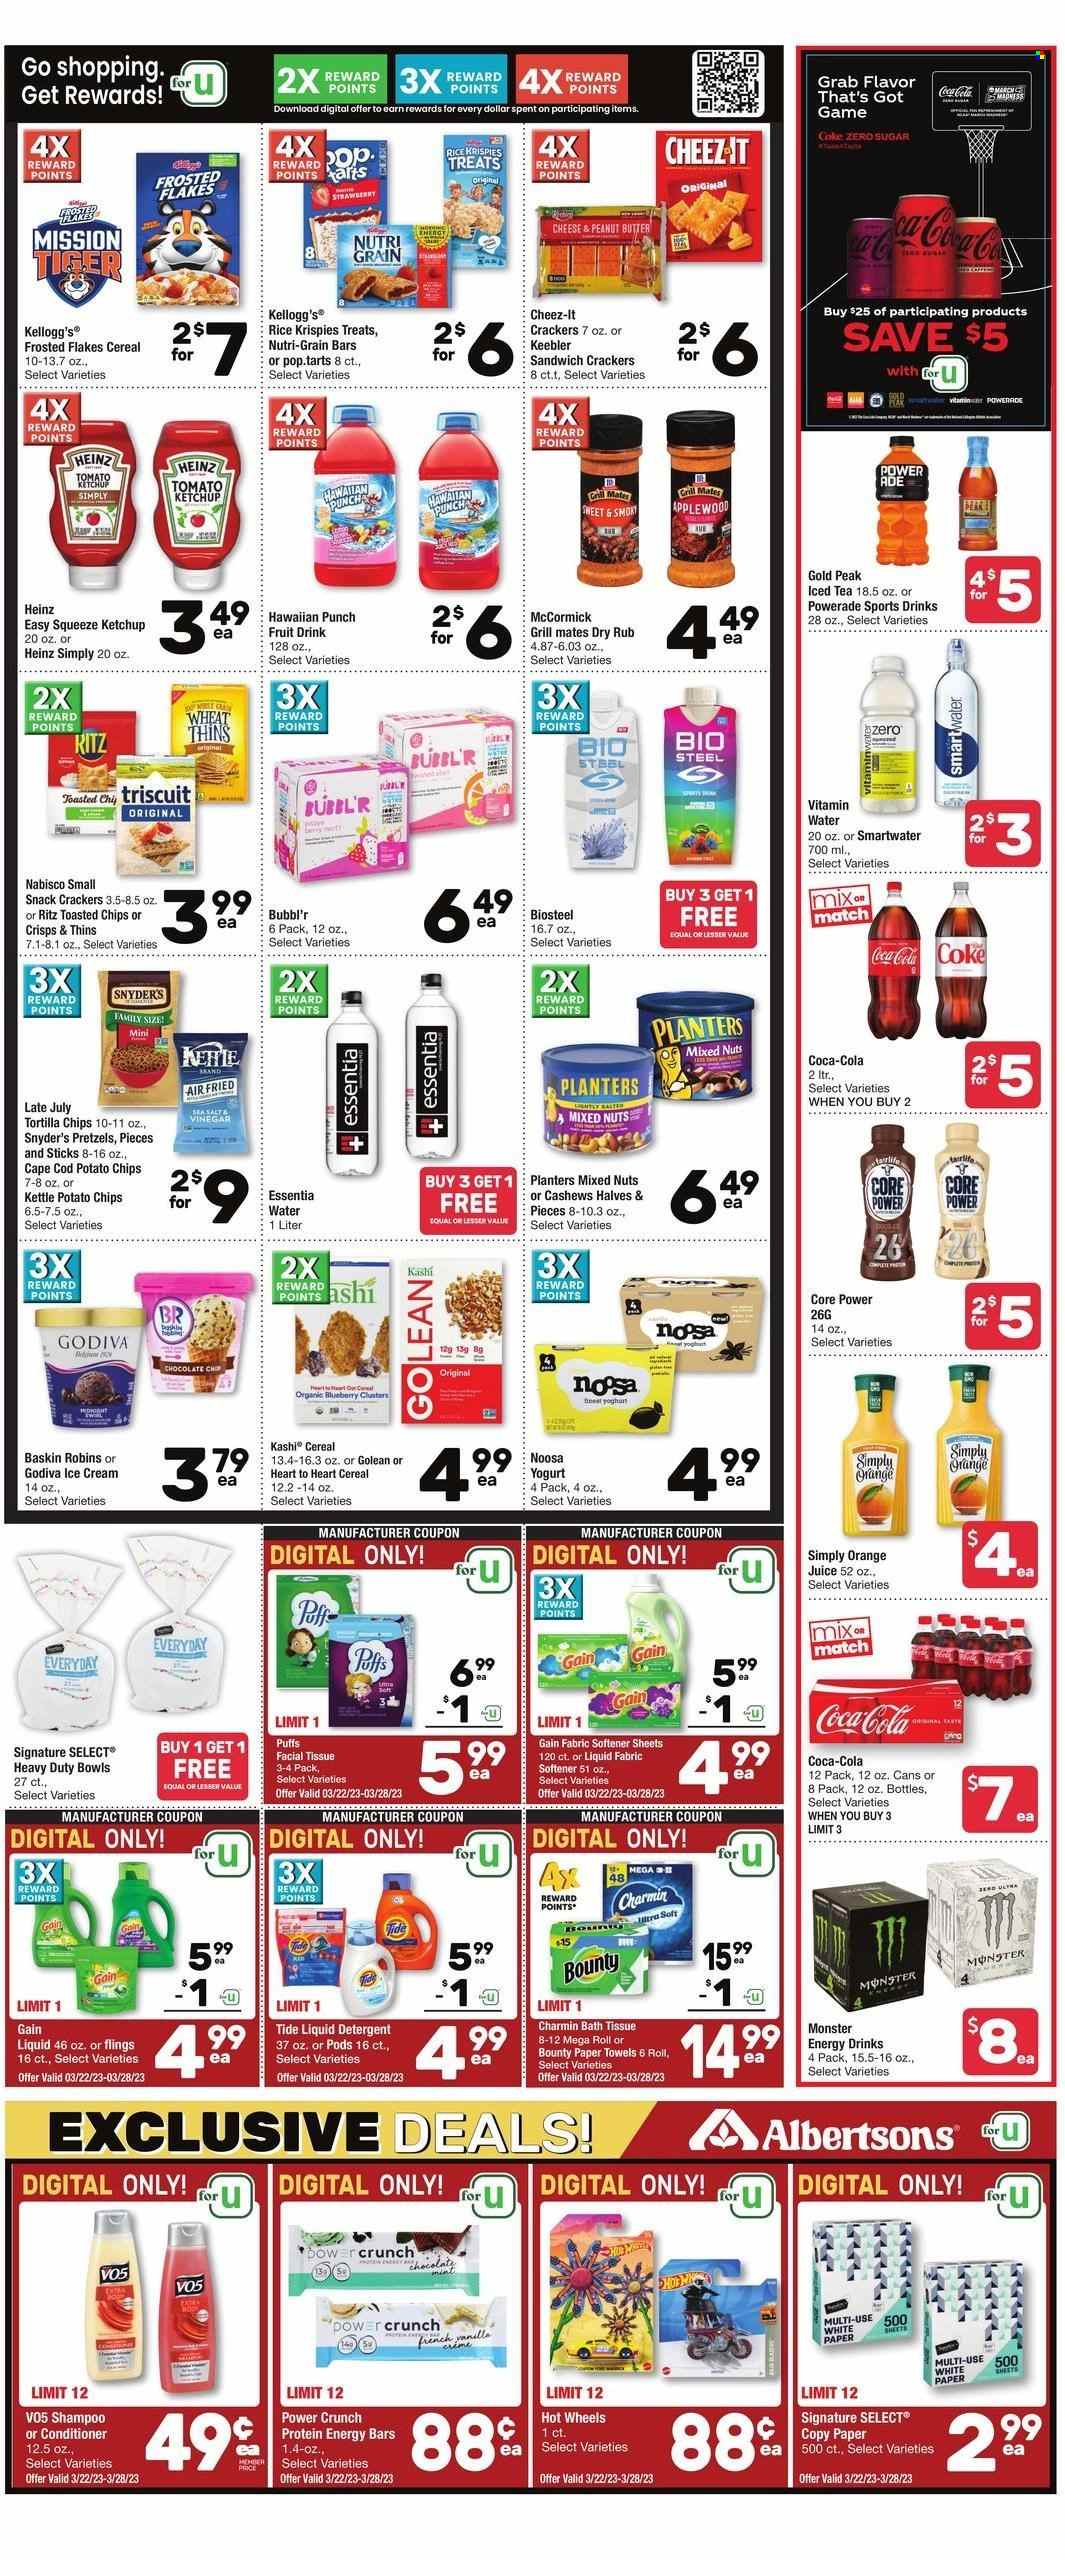 thumbnail - Albertsons Flyer - 03/22/2023 - 03/28/2023 - Sales products - pretzels, puffs, cod, yoghurt, Core Power, ice cream, chocolate chips, snack, Bounty, Godiva, crackers, Kellogg's, Keebler, RITZ, tortilla chips, potato chips, chips, Thins, Cheez-It, Heinz, cereals, Rice Krispies, energy bar, Frosted Flakes, Nutri-Grain, ketchup, peanut butter, cashews, mixed nuts, Planters, Coca-Cola, Powerade, orange juice, juice, energy drink, Monster, fruit drink, ice tea, Coca-Cola zero, Monster Energy, Coke, Smartwater, vitamin water, water, Hot Wheels, bath tissue, kitchen towels, paper towels, Charmin, detergent, Gain, Tide, fabric softener, liquid detergent, shampoo, conditioner. Page 5.